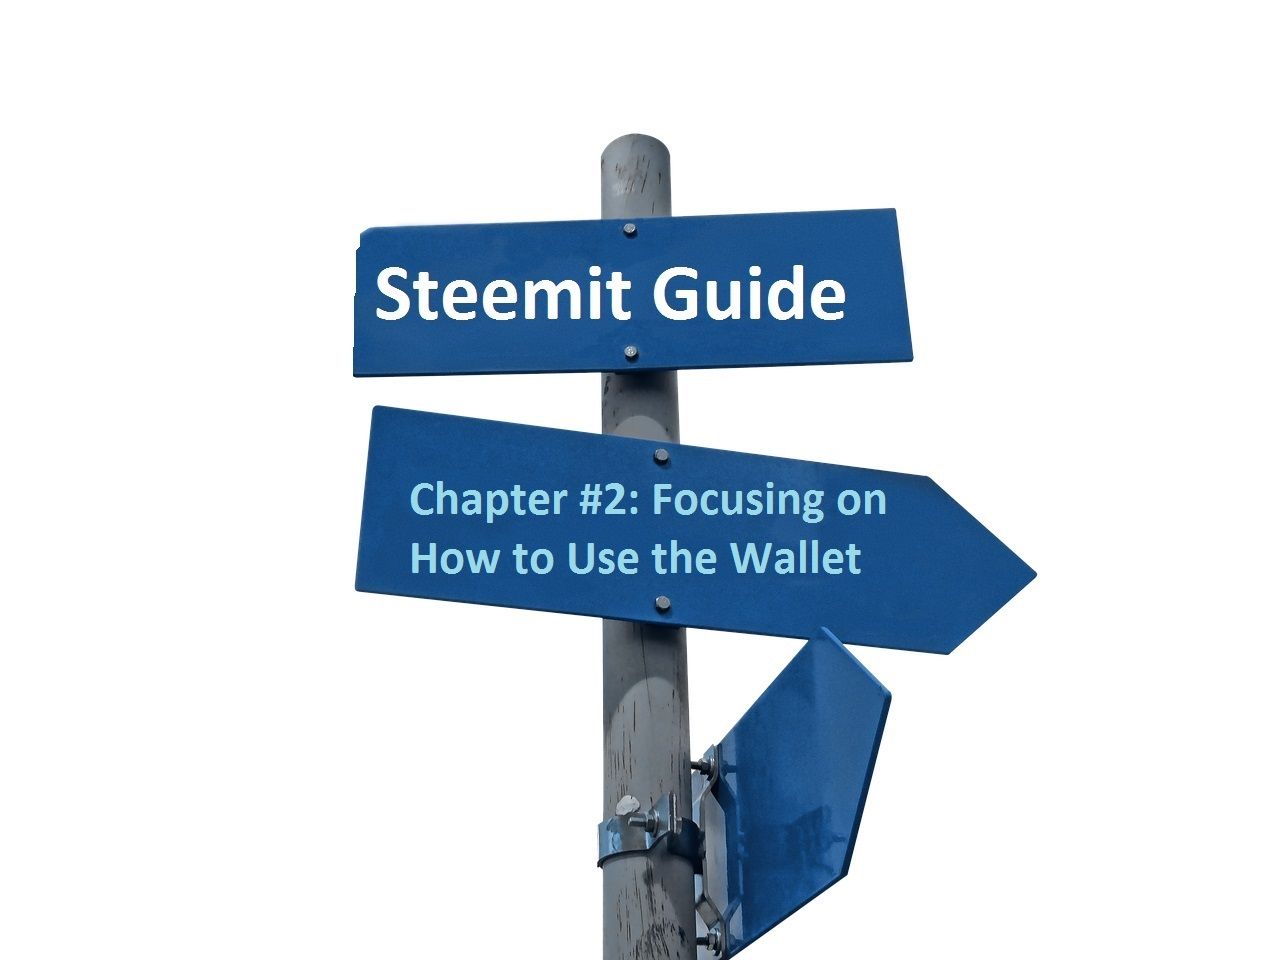 Steemit Guide Chapters - Steem Blockchain - Chapter 2 - How to use the Steem Wallet.jpg